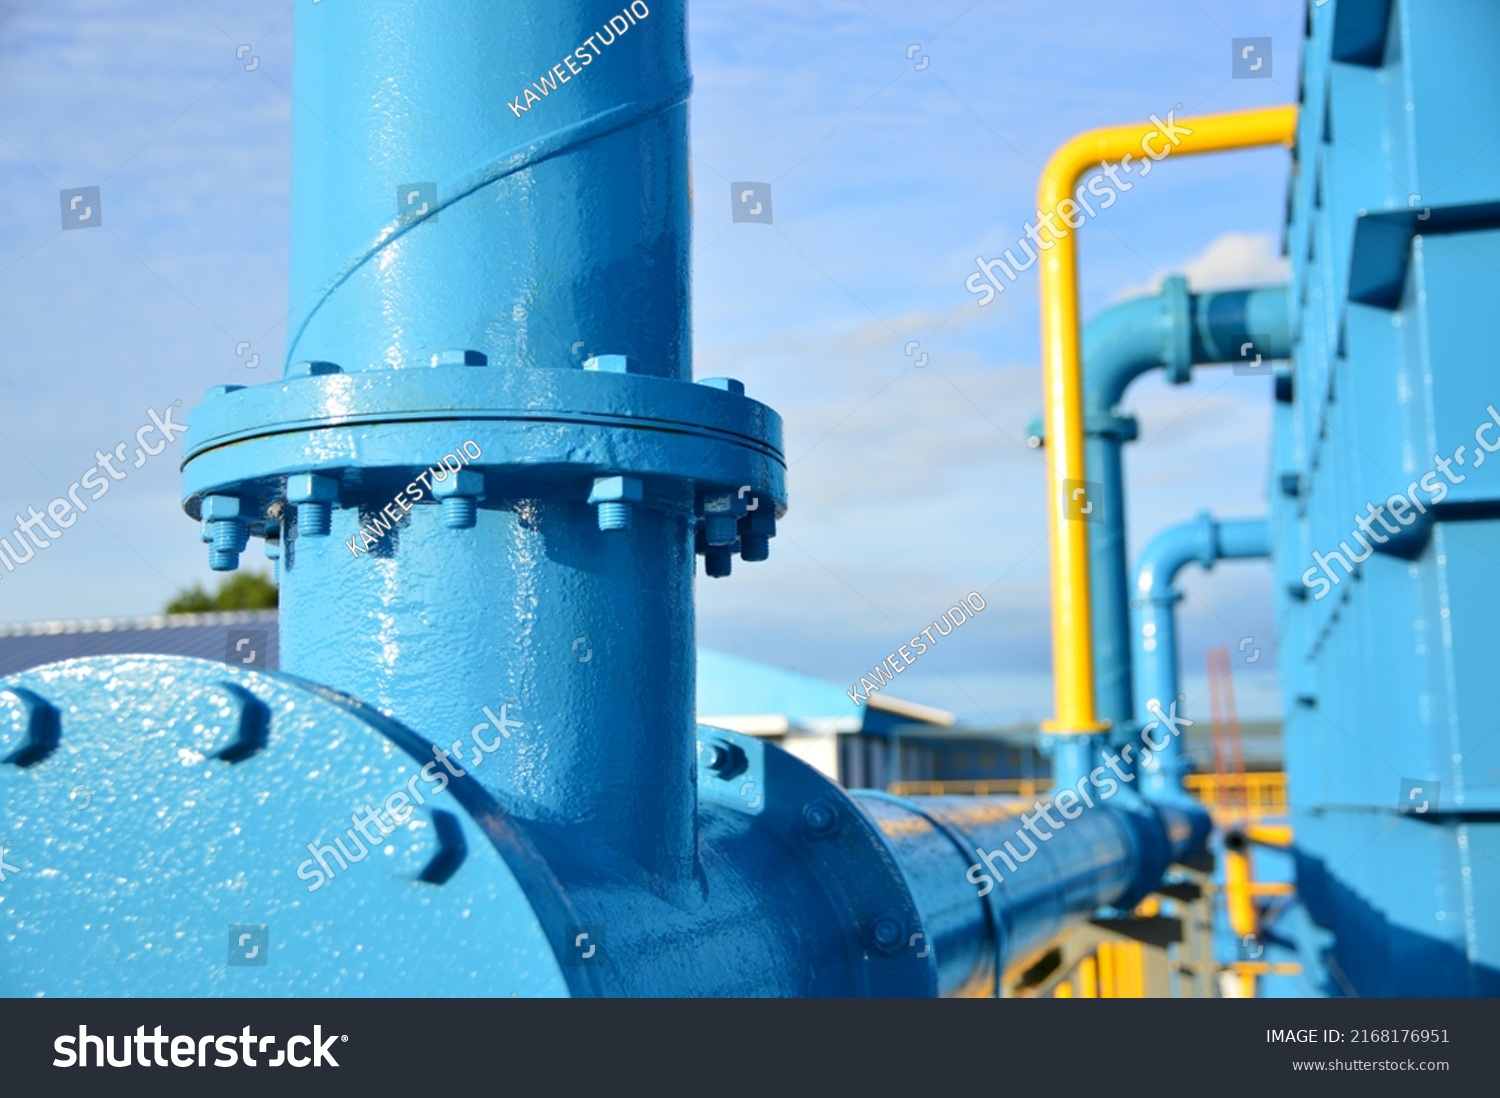 Water steel pipe close up image. Select focus of drink water piping. Flange Pipe Fitting with copy space. #2168176951